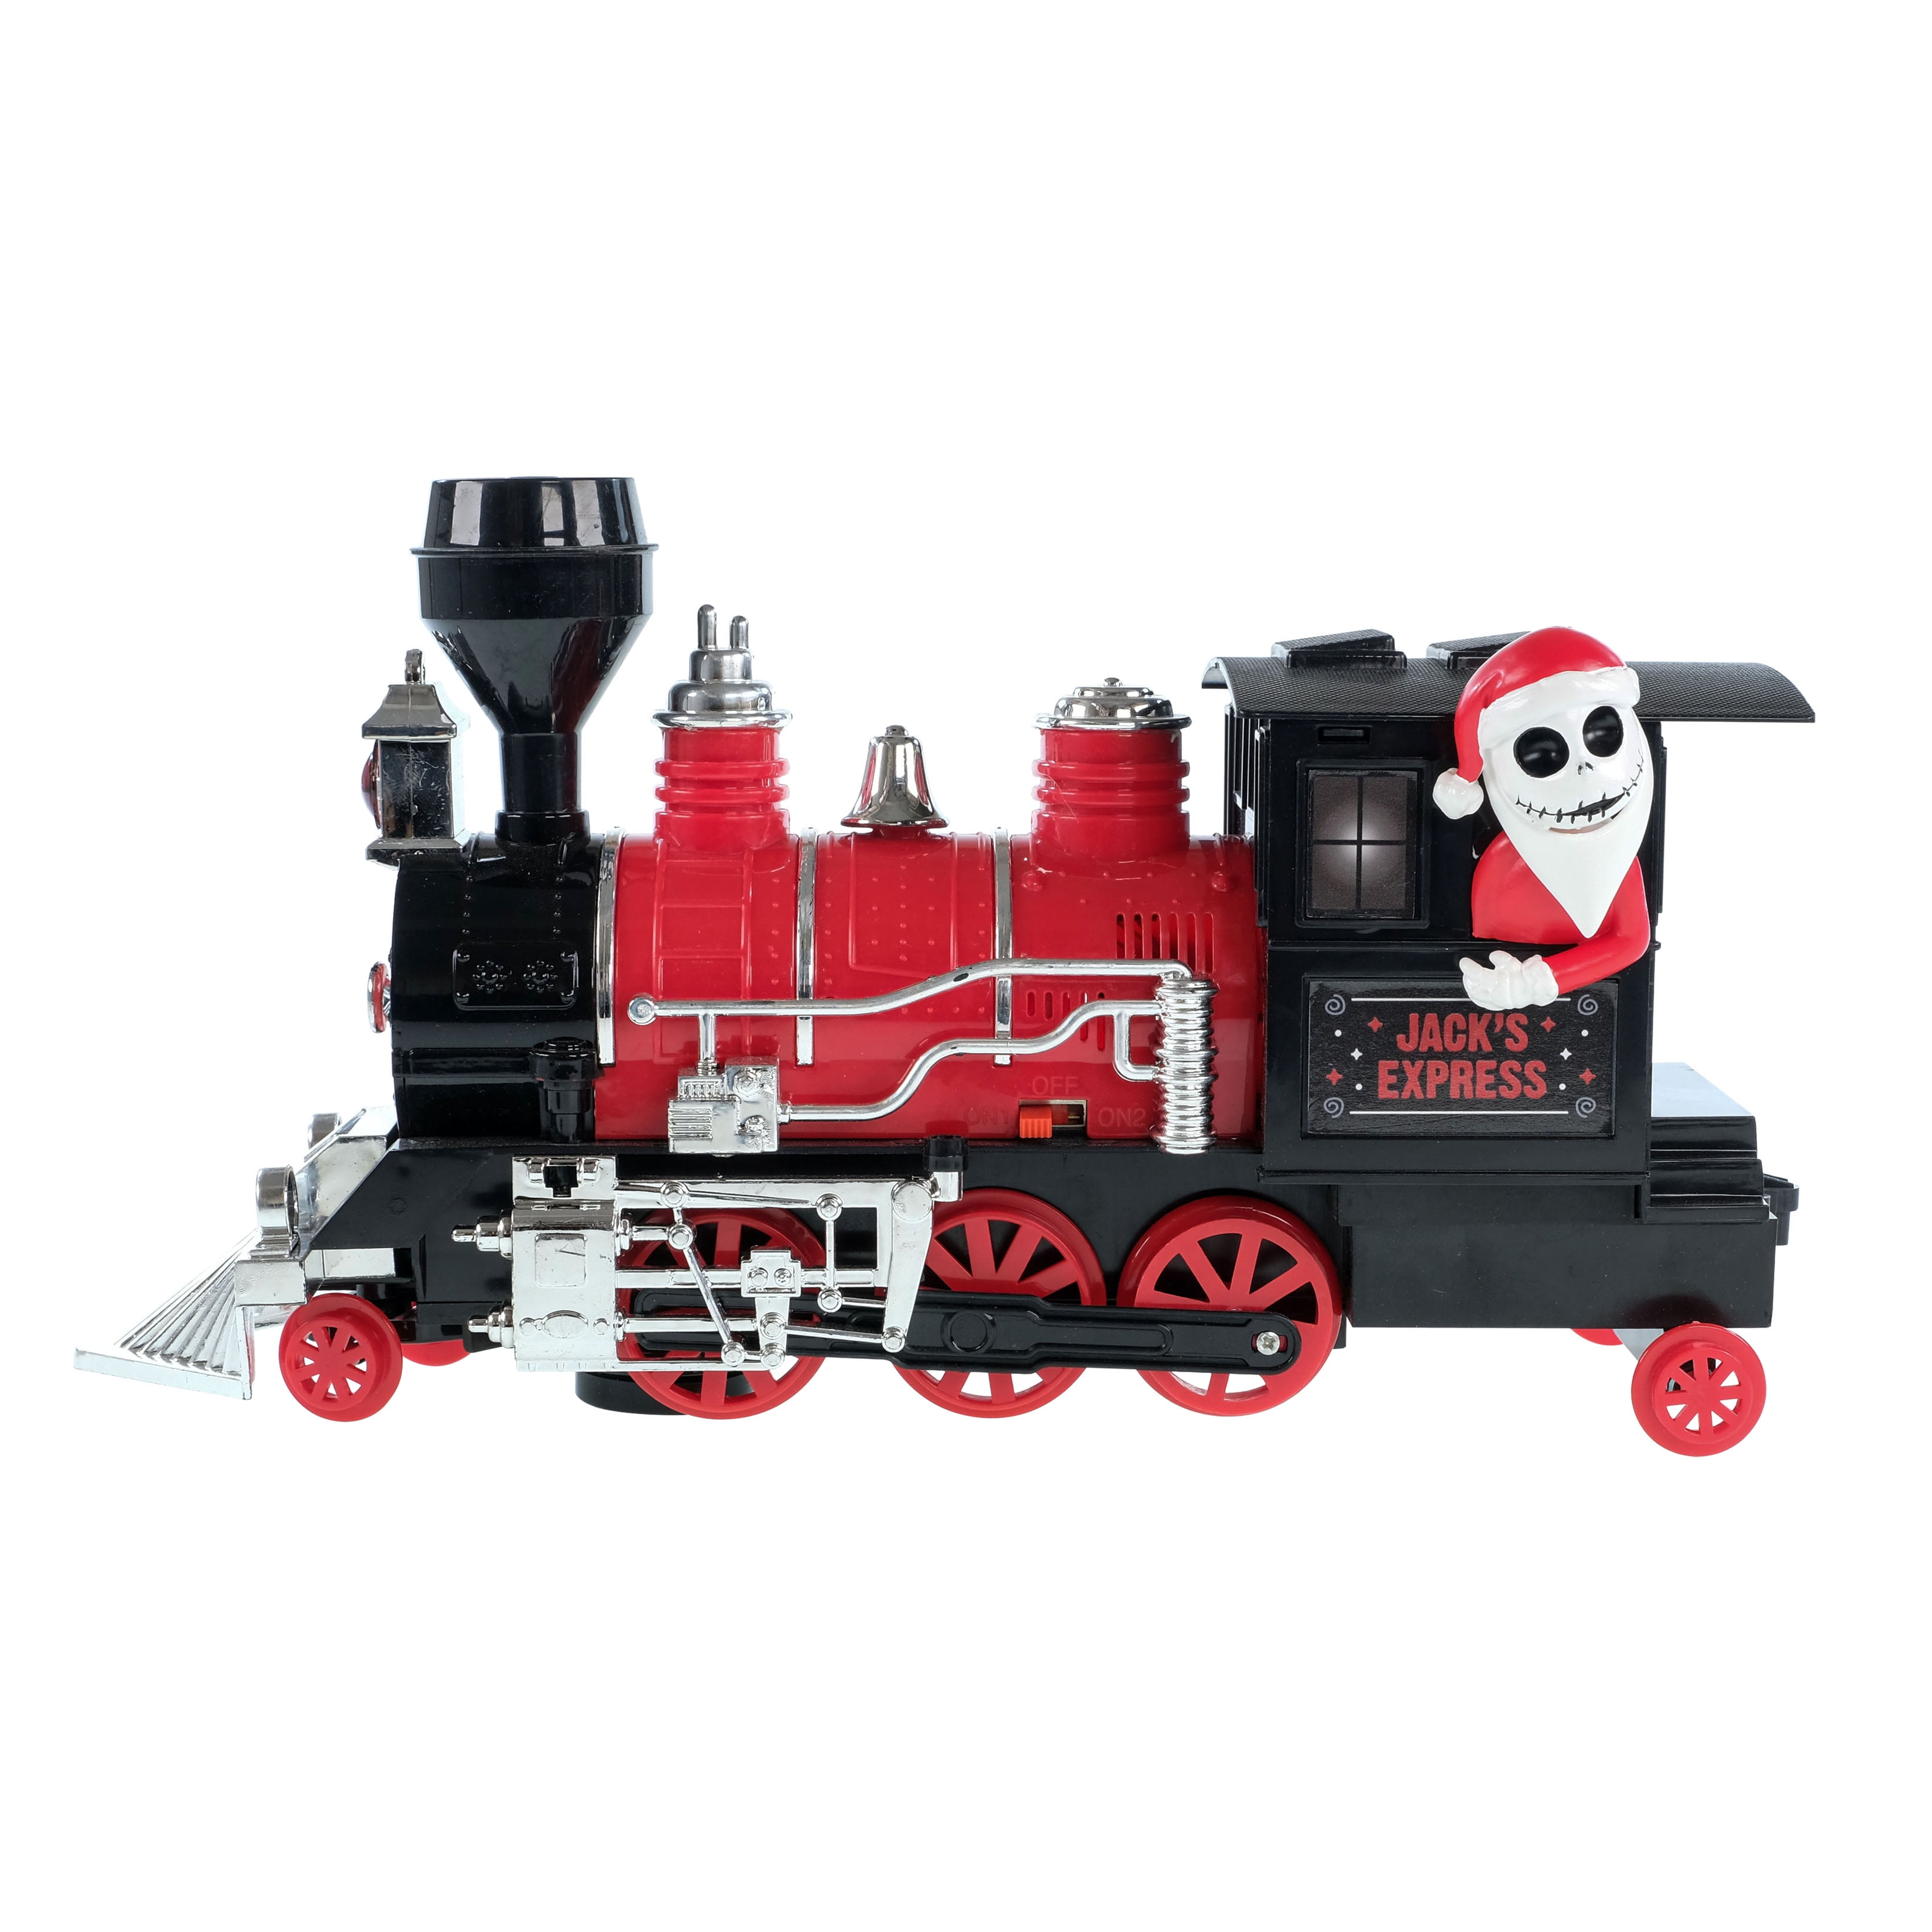 Walt Dissney Disney, The Nightmare Before Christmas, Bump 'N Go Train, Battery Operated, Plastic, Multi-Color